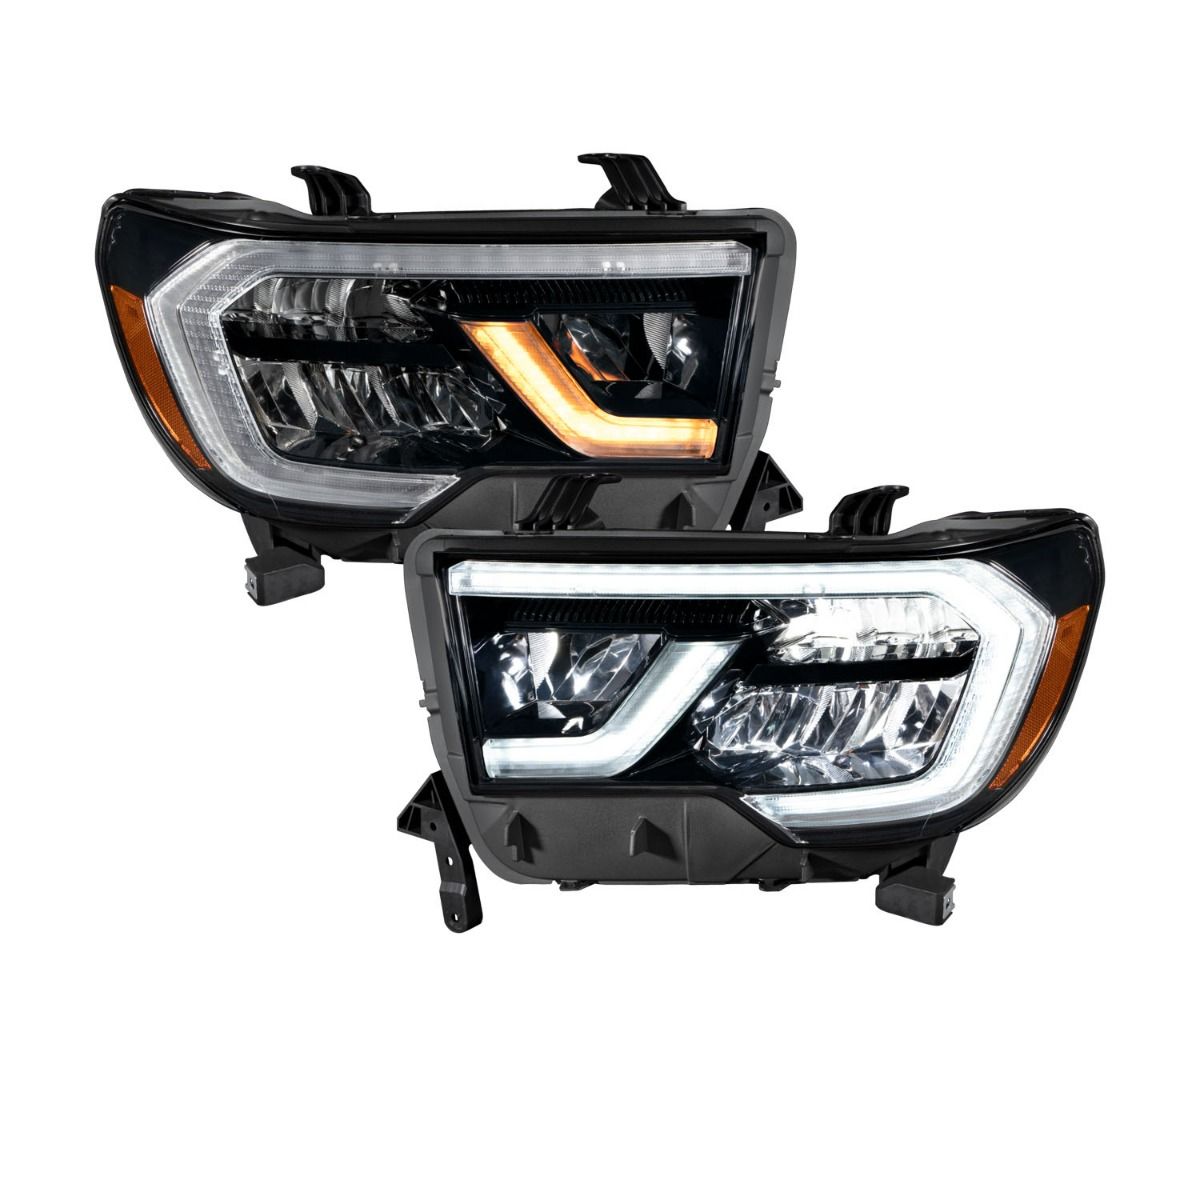 2007-2013 Toyota Tundra and 2008-2017 Sequoia LED Reflector Headlights Pair Form Lighting - FL0010